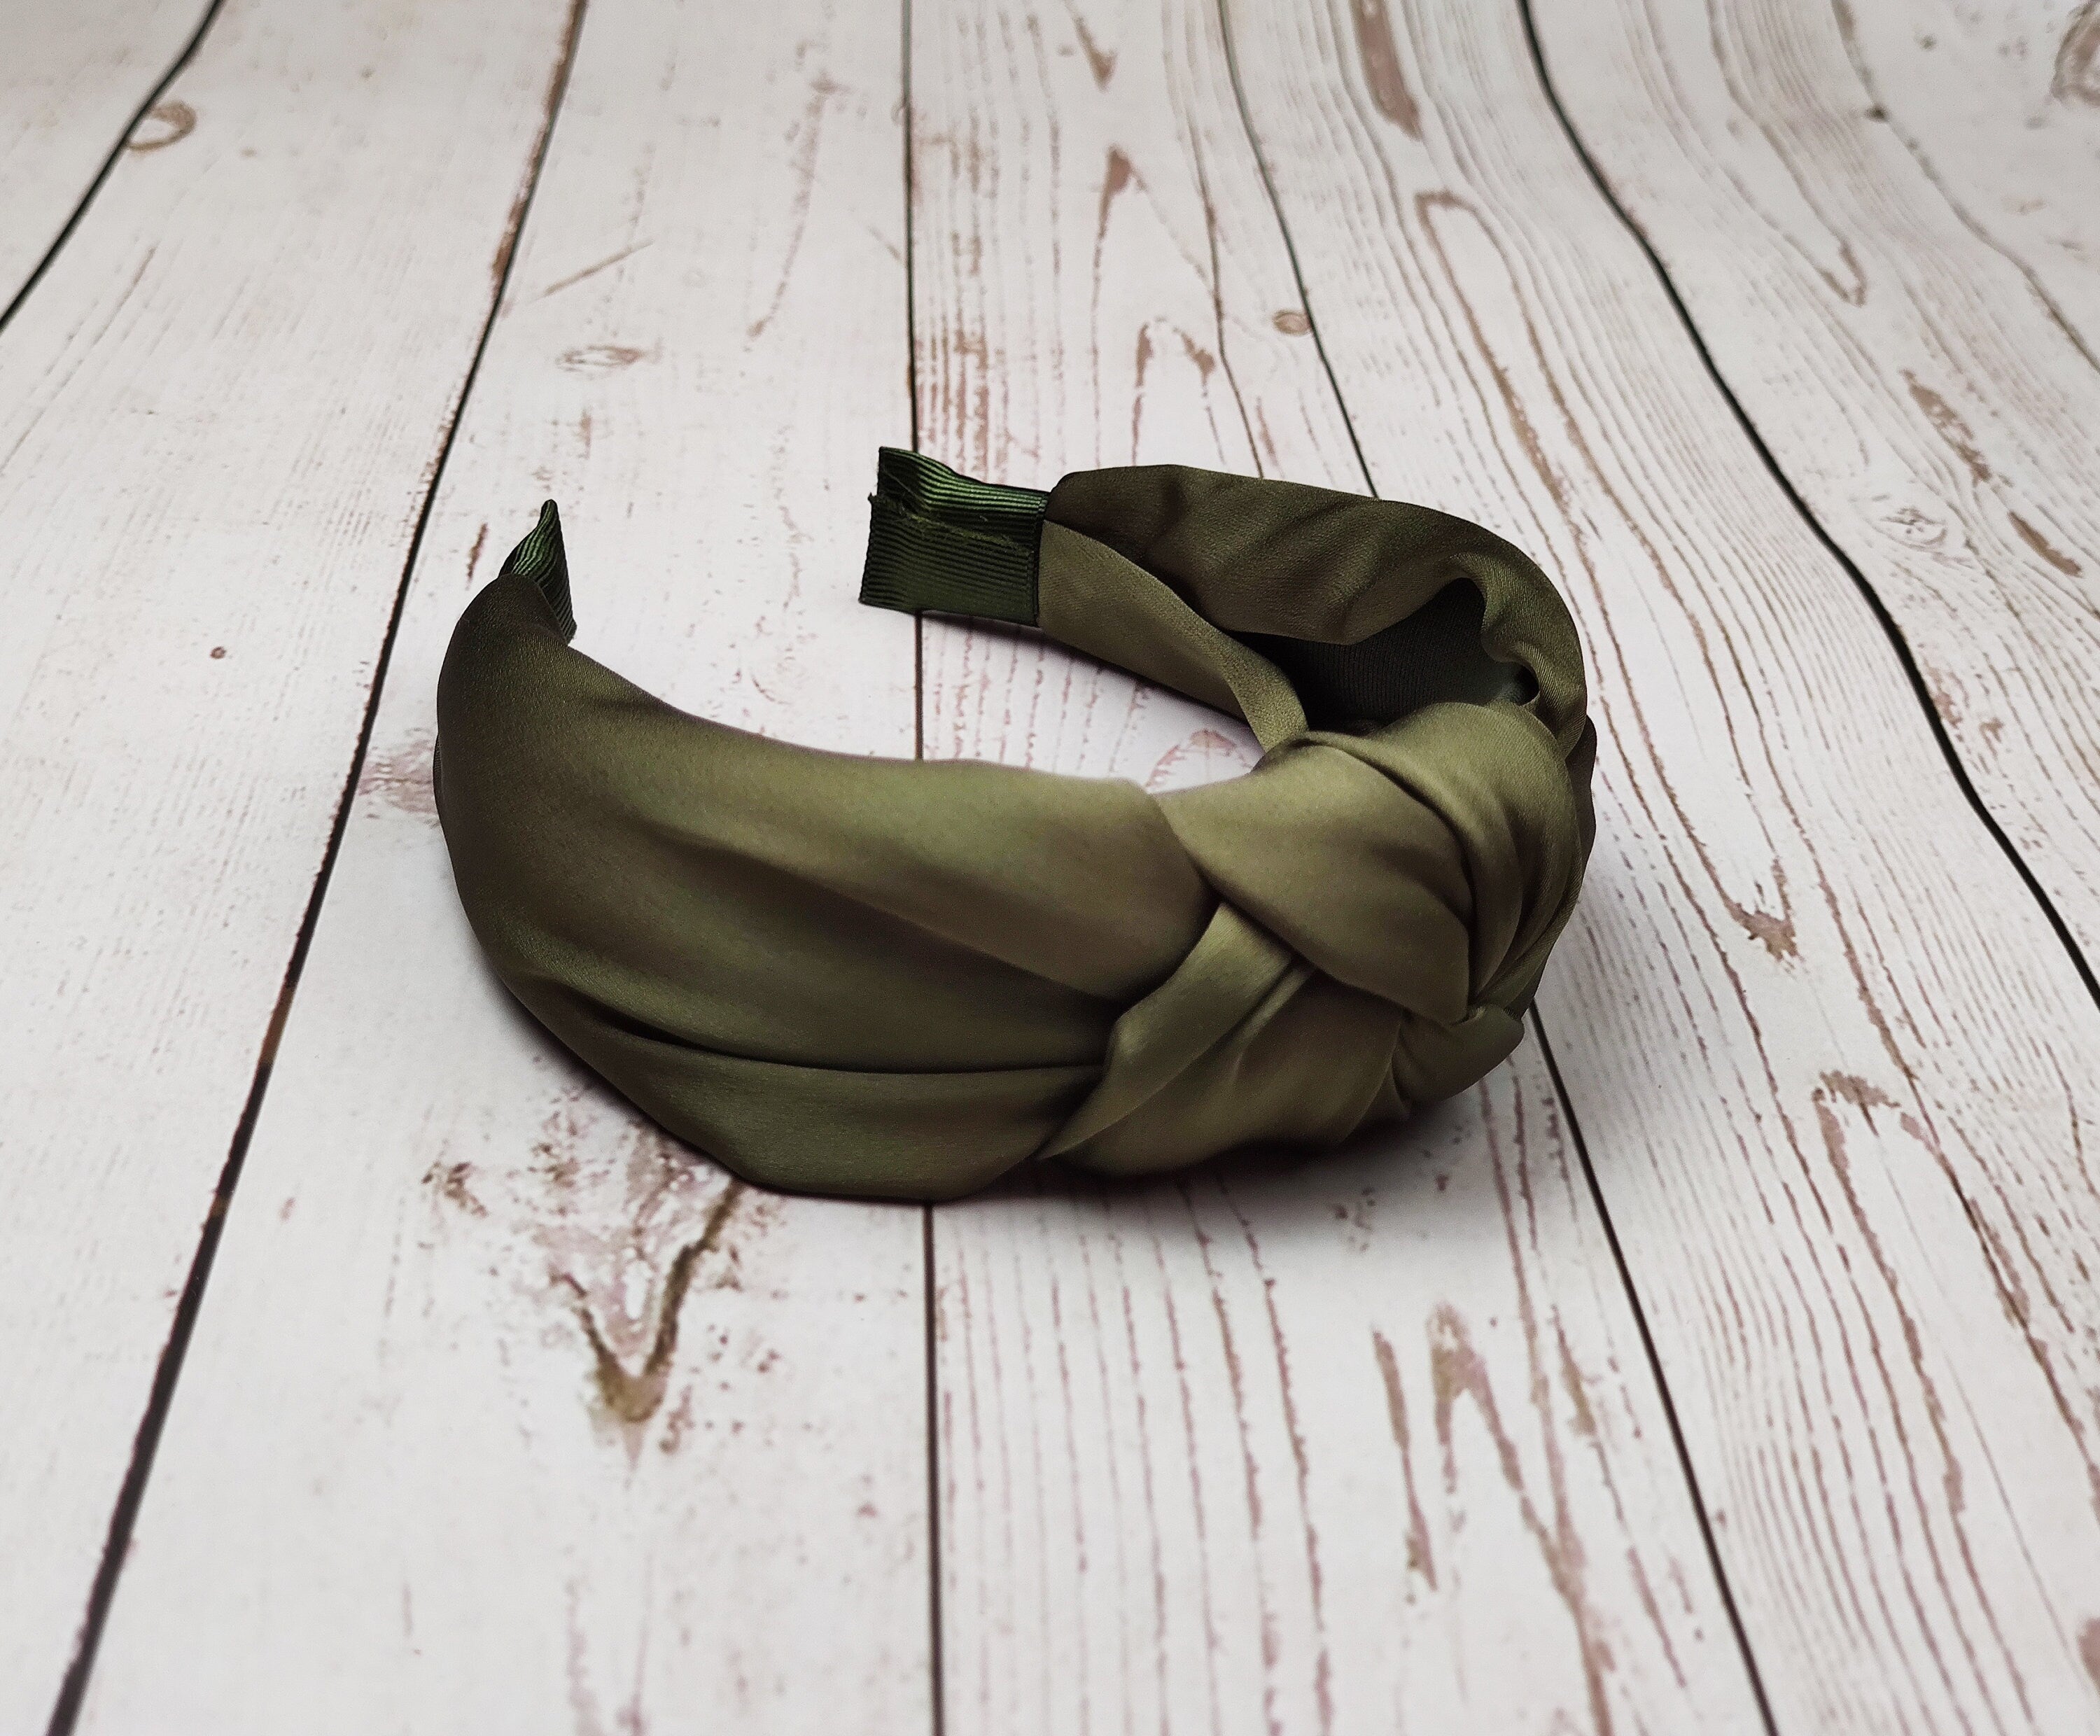 Stay on-trend with this Khaki Green Headband. Whether you are running errands or meeting friends for coffee, this fashionable hairband will add the perfect finishing touch to your outfit.